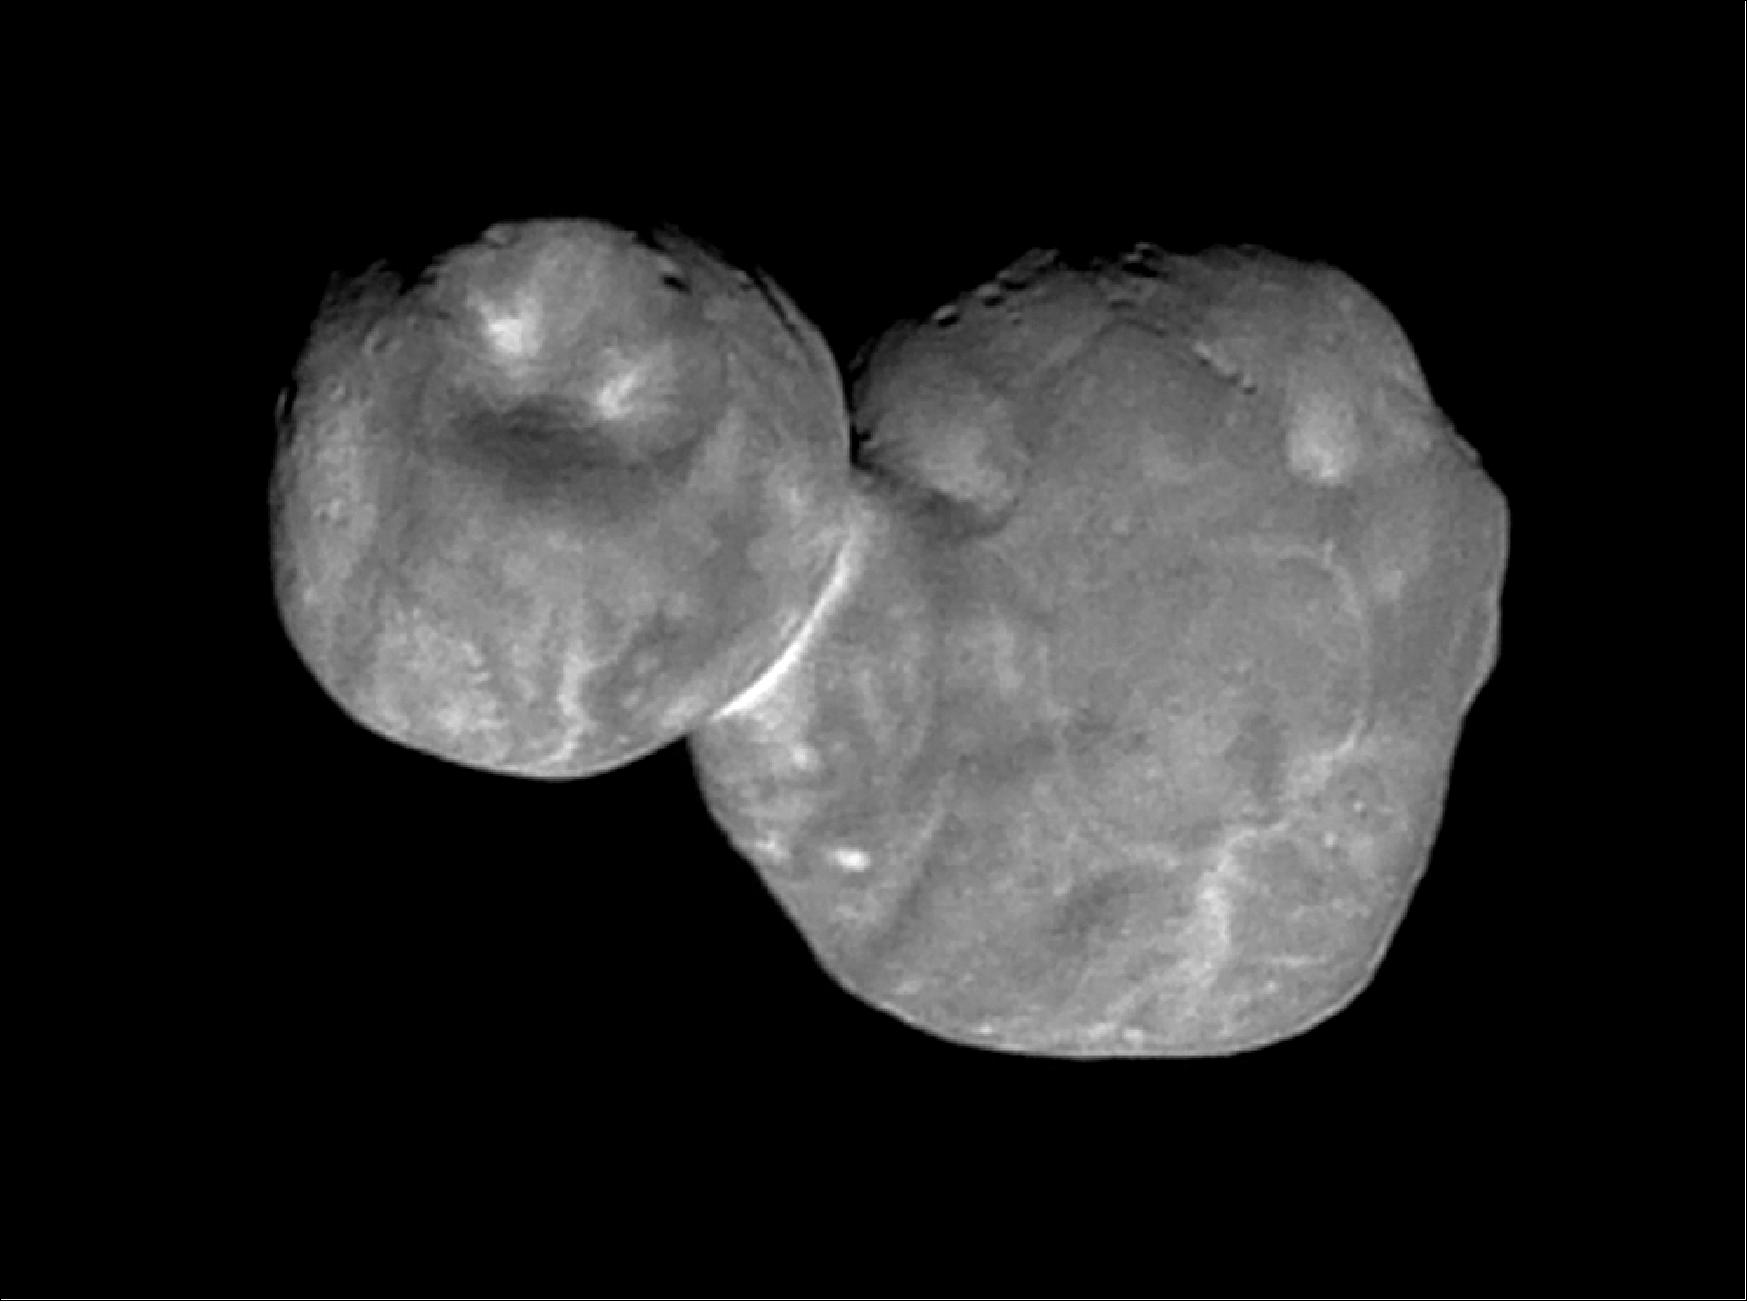 Figure 42: This image, taken during the historic Jan. 1 flyby of what's informally known as Ultima Thule, is the clearest view yet of this remarkable, ancient object in the far reaches of the solar system – and the first small KBO (Kuiper Belt Object) ever explored by a spacecraft (image credit: NASA, JHU/APL, SwRI)